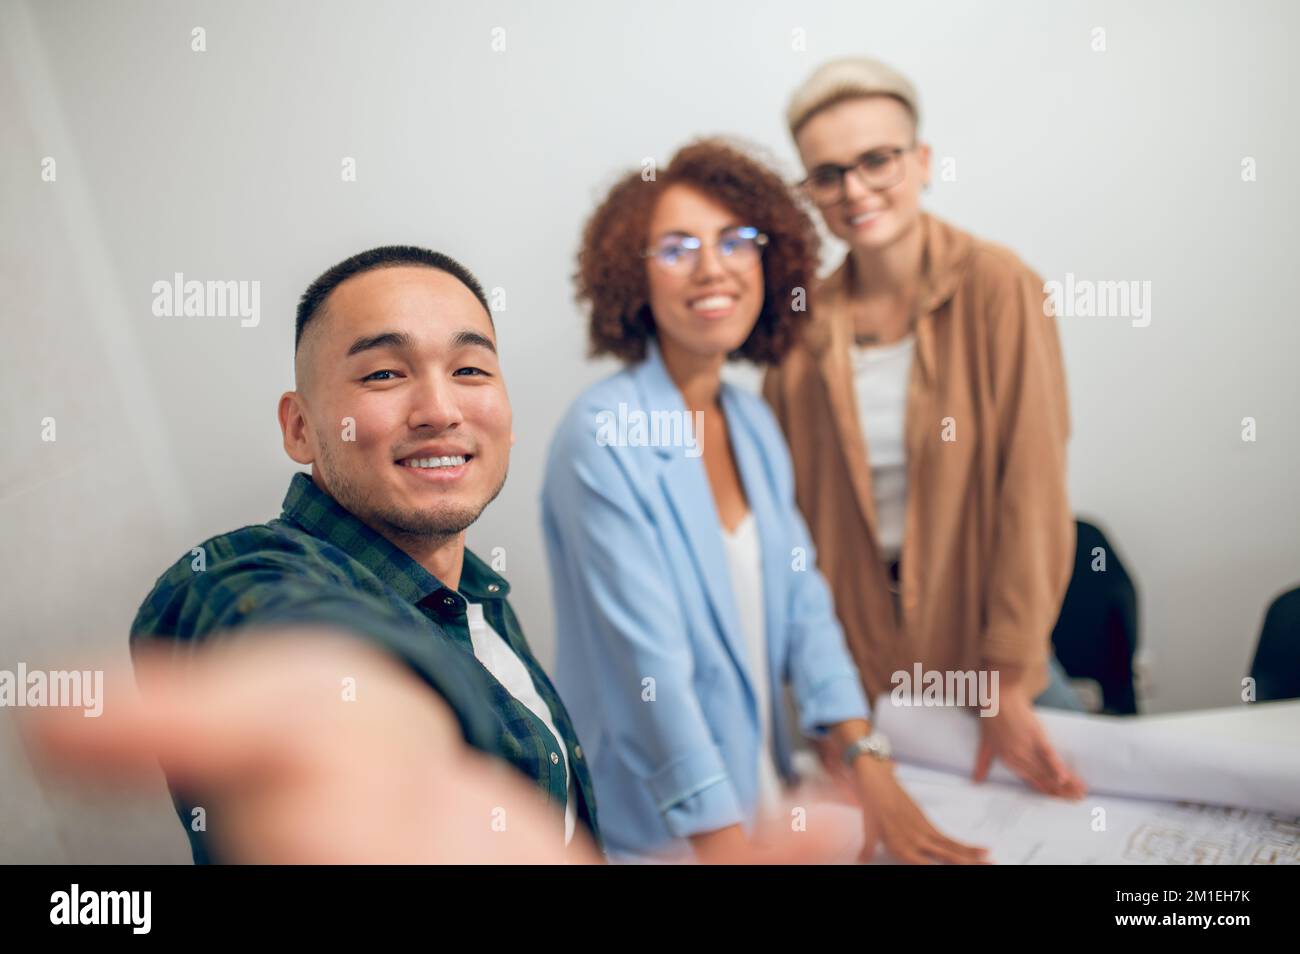 Cheerful draftsman photographing himself and coworkers at the staff meeting Stock Photo